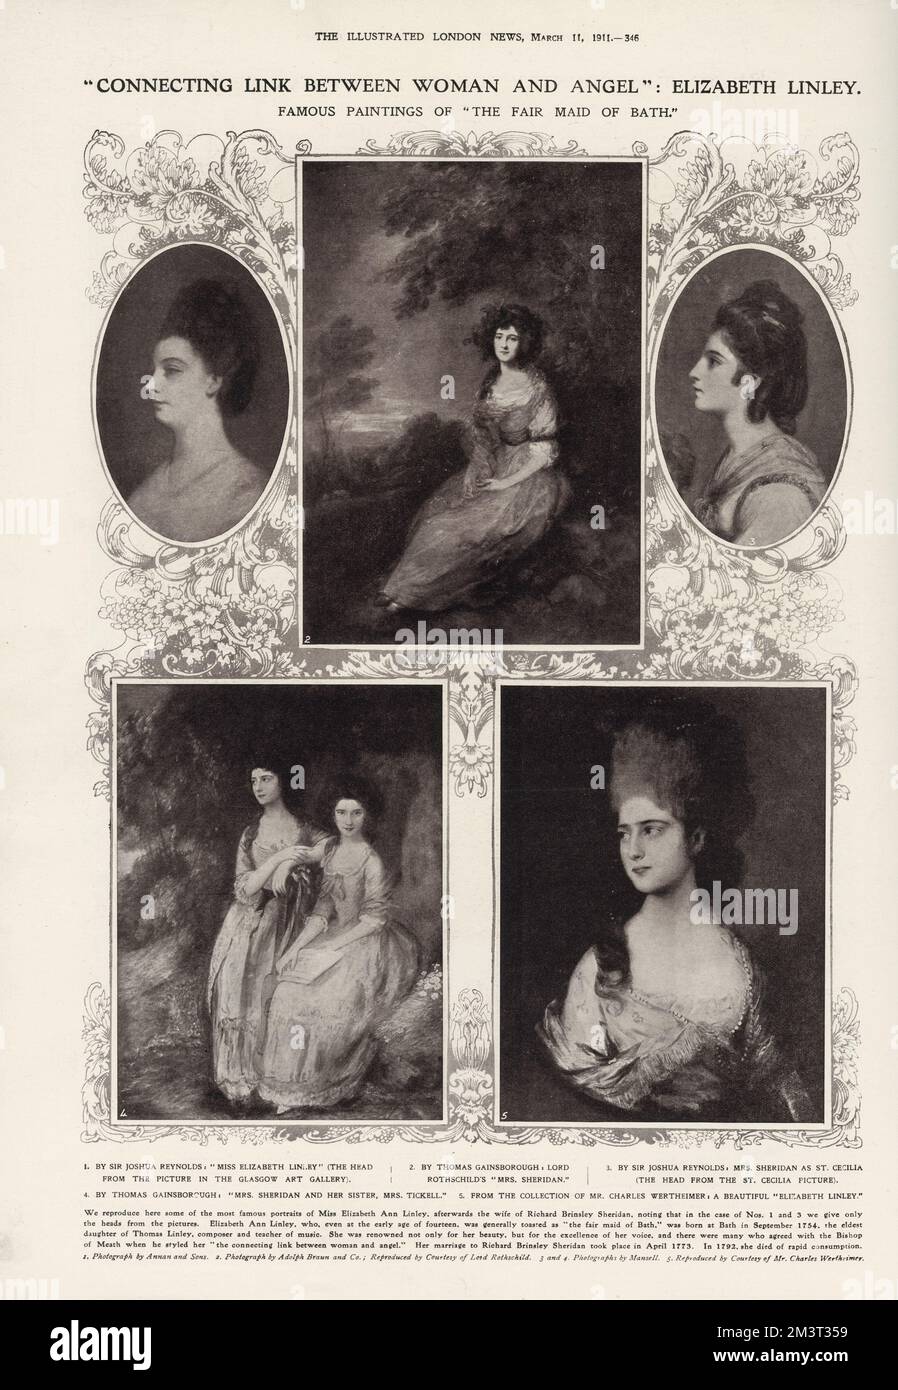 Connecting link between woman and angel: Miss Elizabeth Ann Linley, afterwards the wife of Richard Brinsley Sheridan - famous paintings of 'The Fair Maid of Bath'. (top row from left): by Sir Joshua Reynolds 'Miss Elizabeth Linley' (the head from the picture in the Glasgow Art Gallery), by Thomas Gainsborough, Lord Rothschild's 'Mrs Sheridan', by Sir Joshua Reynolds, Mrs Sheridan as Saint Cecilia (the head from the St. Cecilia picture) (bottom row from left): by Thomas Gainsborough, 'Mrs Sheridan and her sister Mrs Tickell' and finally, from the collection of Mr Charles Wertheimer, a beautifu Stock Photo